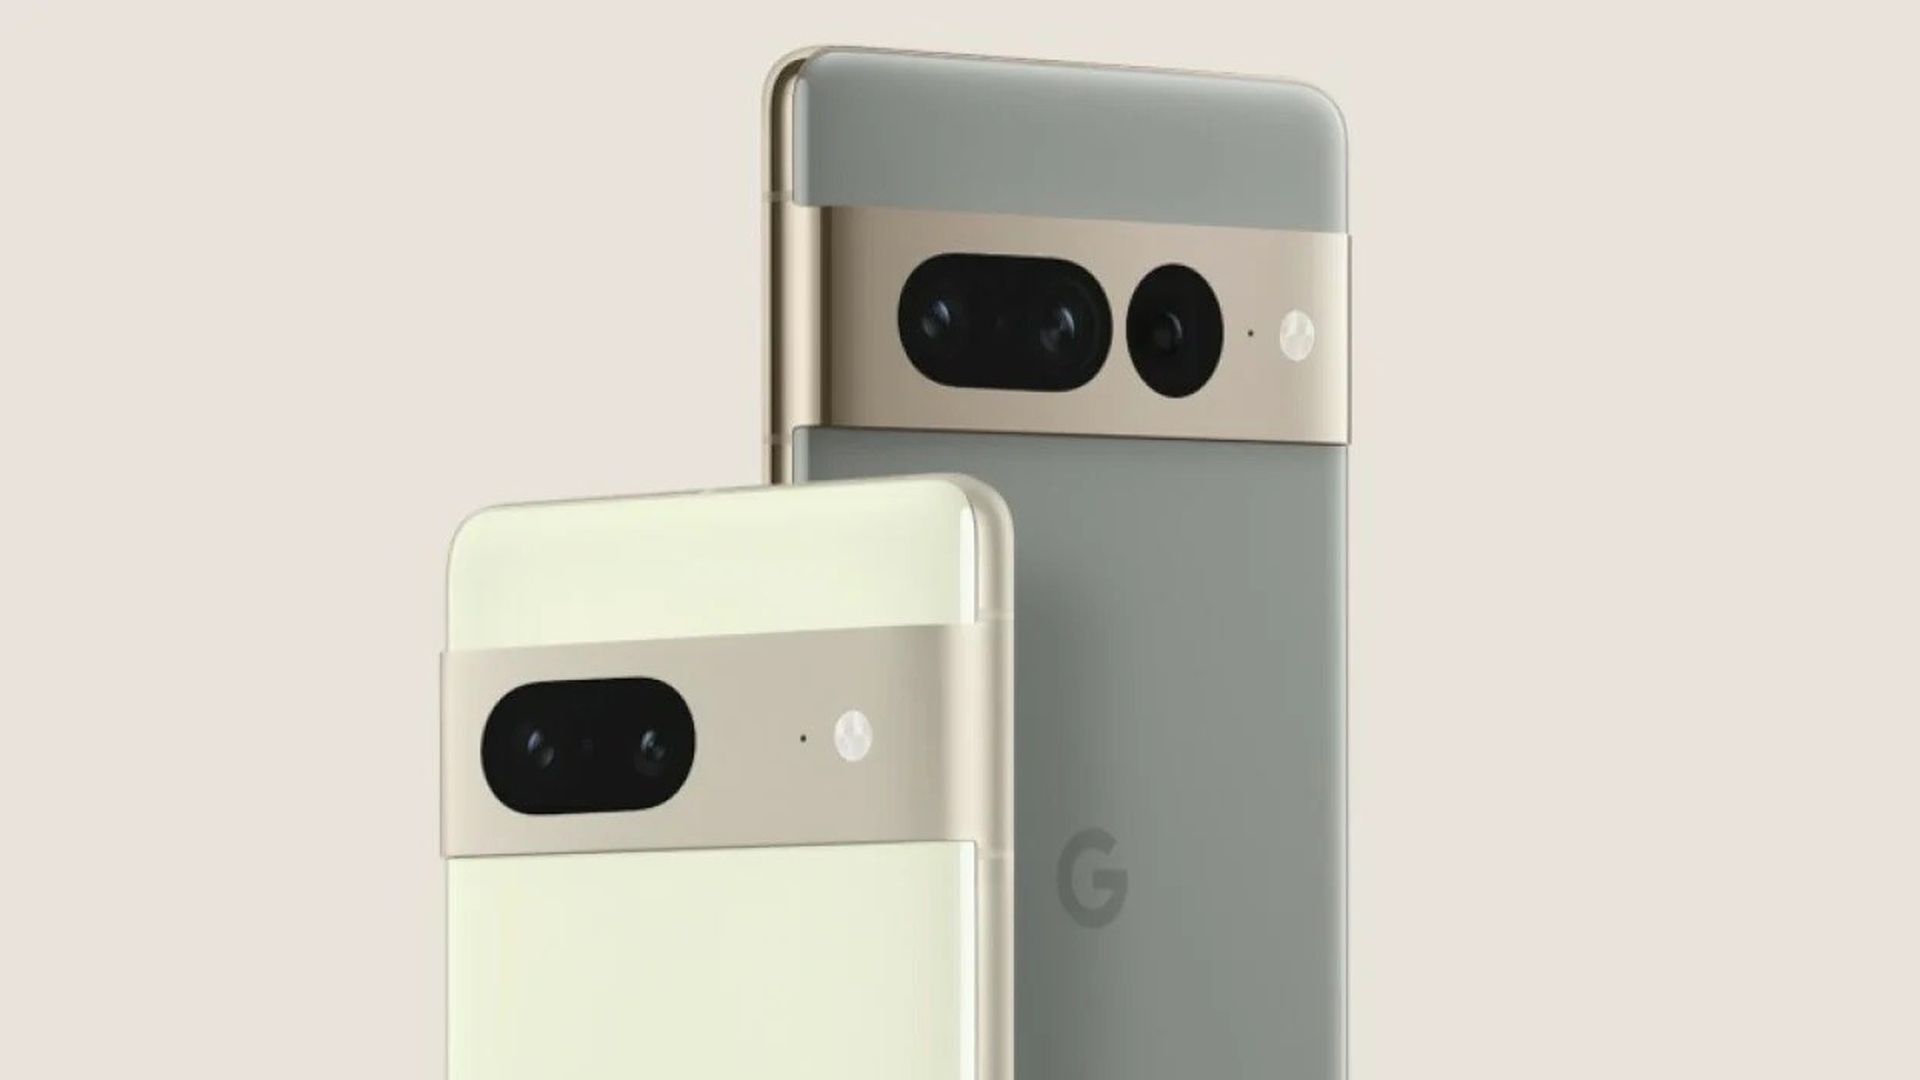 In this article, we are going to be covering Google Pixel 7 and Pixel 7 Pro: Price, specs, and more, so you can decide whether it is worth the price tag.